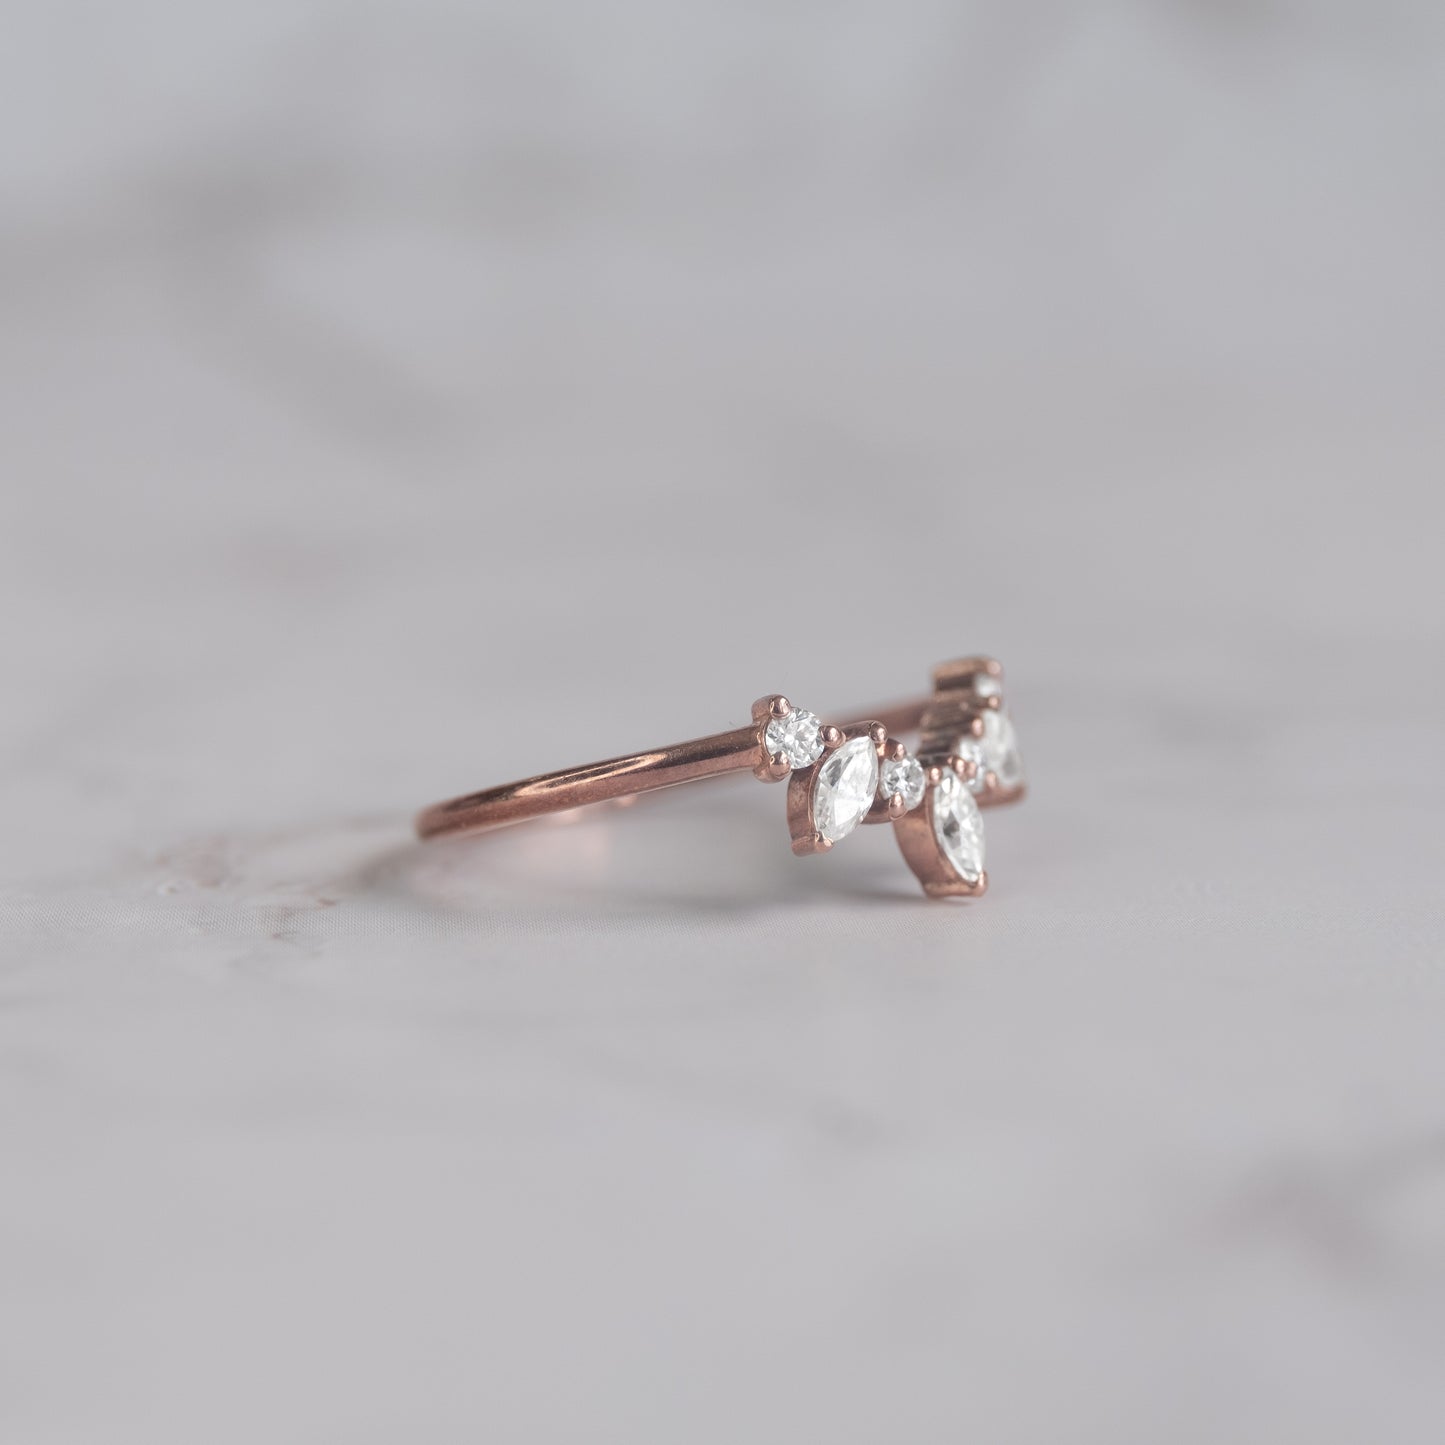 Suzette - The Antler Side Ring with Diamond